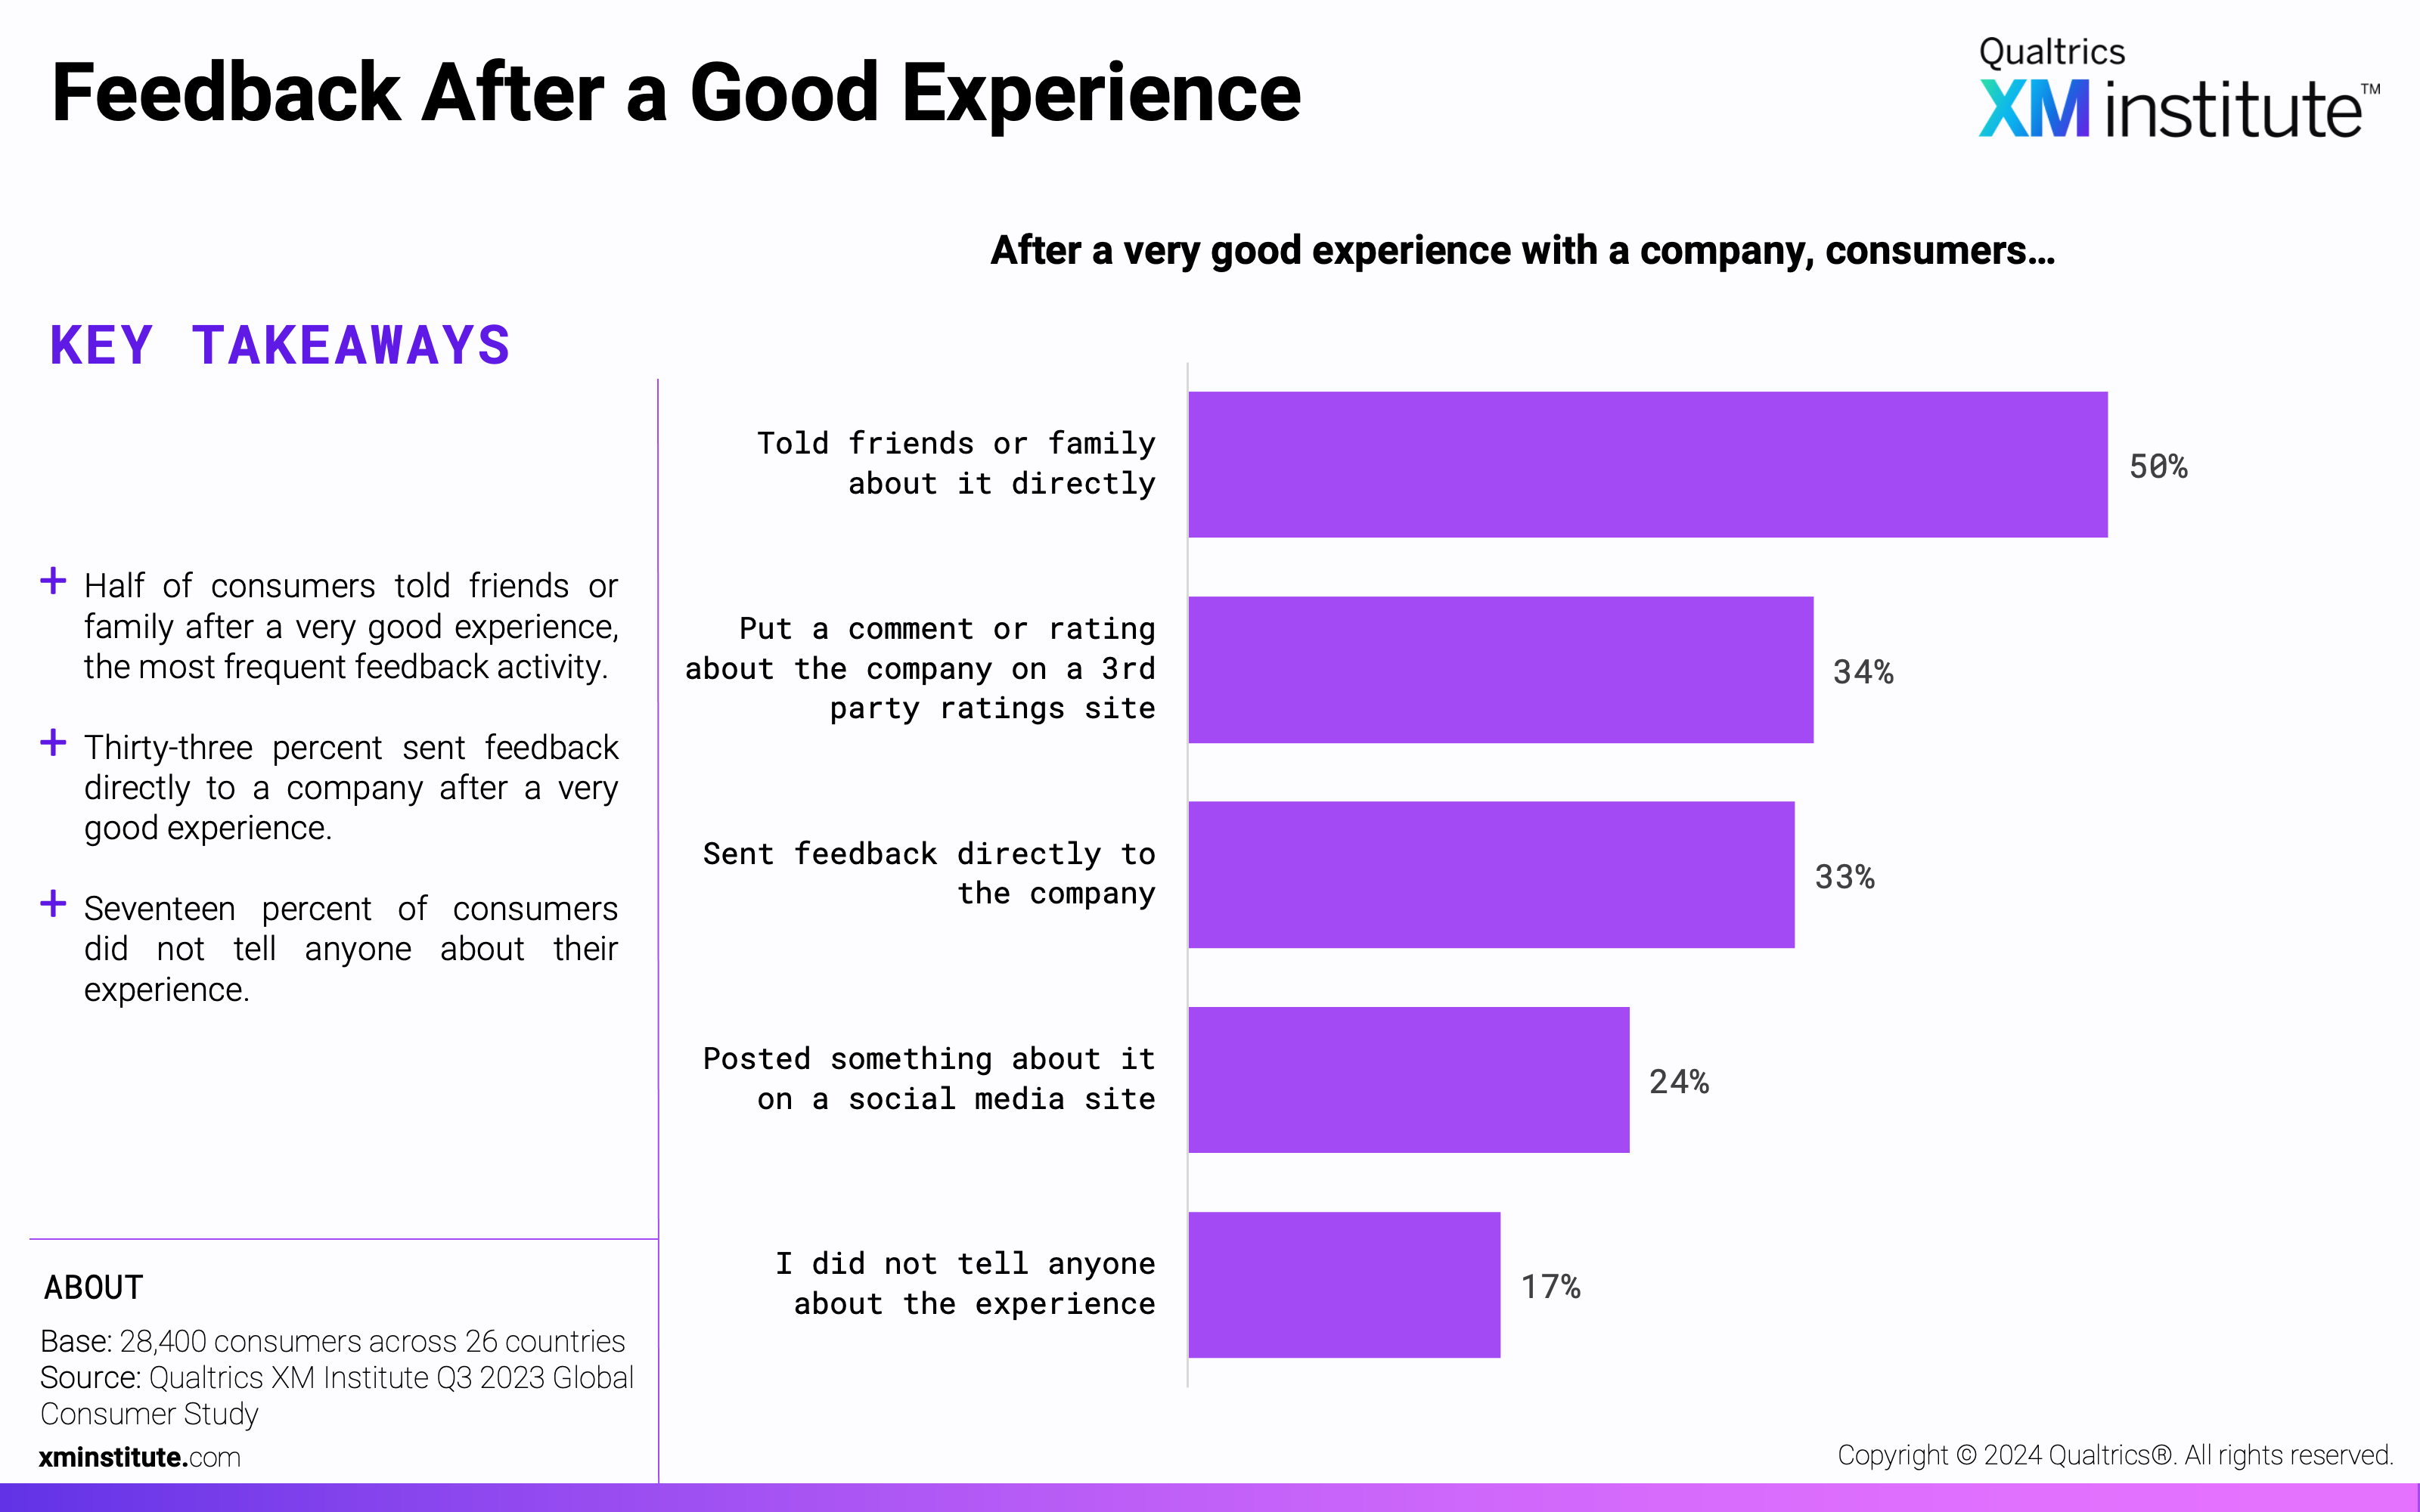 This chart shows the percentage of consumers that shared feedback through each method after a very good experience with a company.